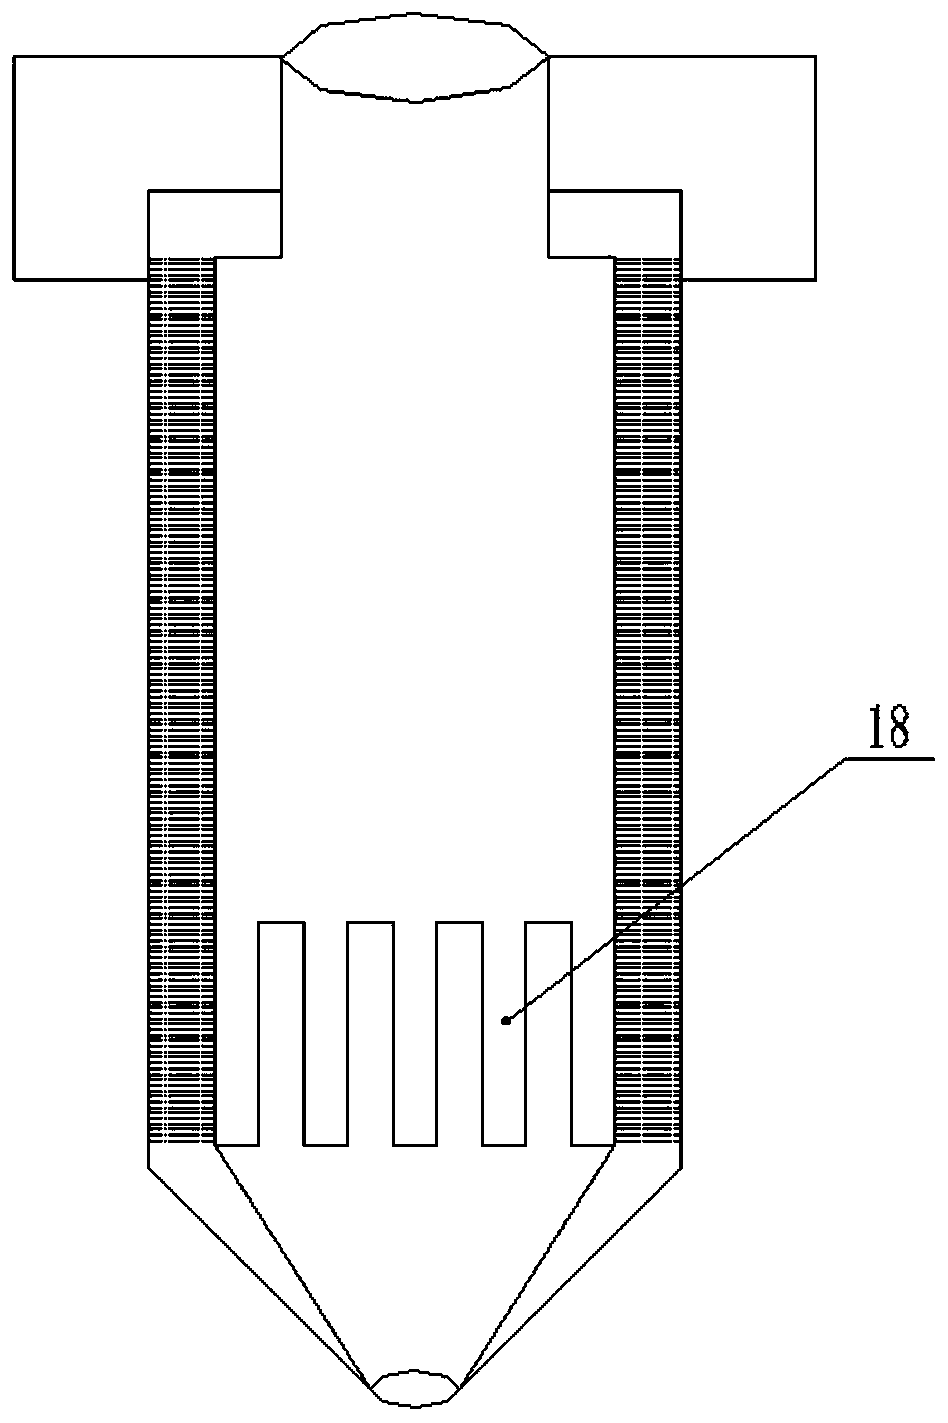 Production method of floors capable of being quickly installed in side sliding mode